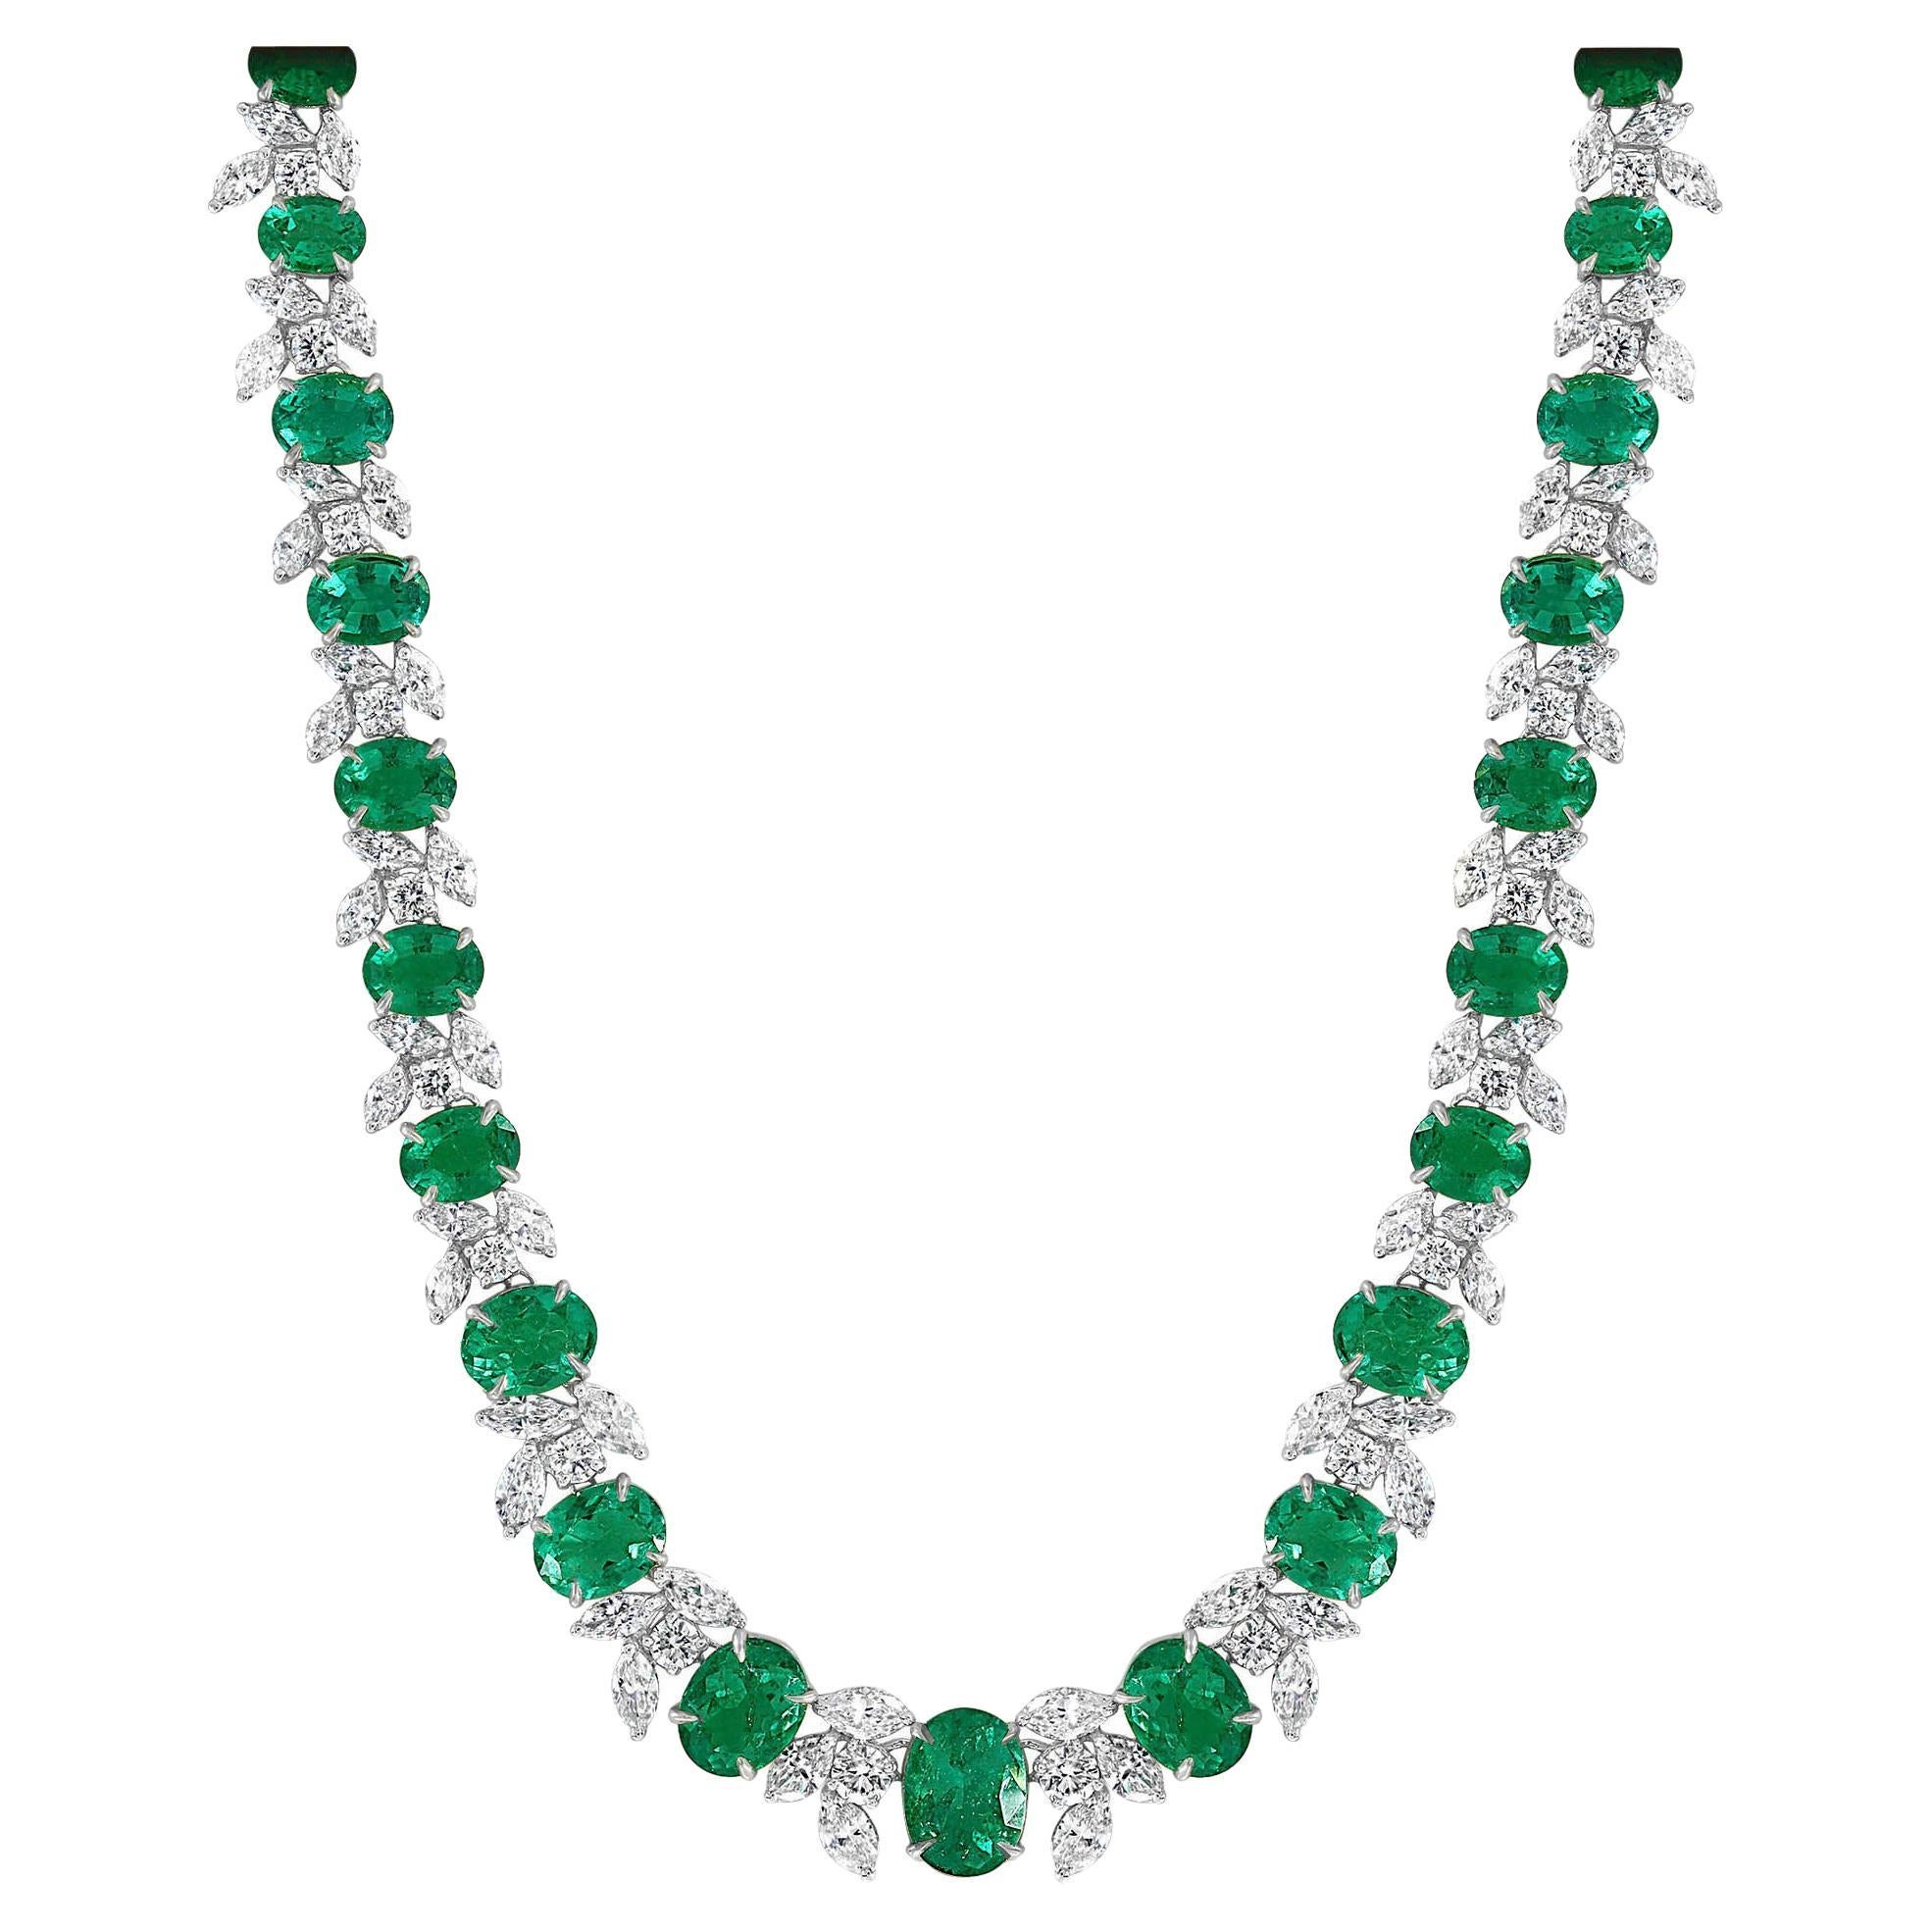 36.87 Carat Emerald and White mixed cut Diamond Necklace in 18k White Gold